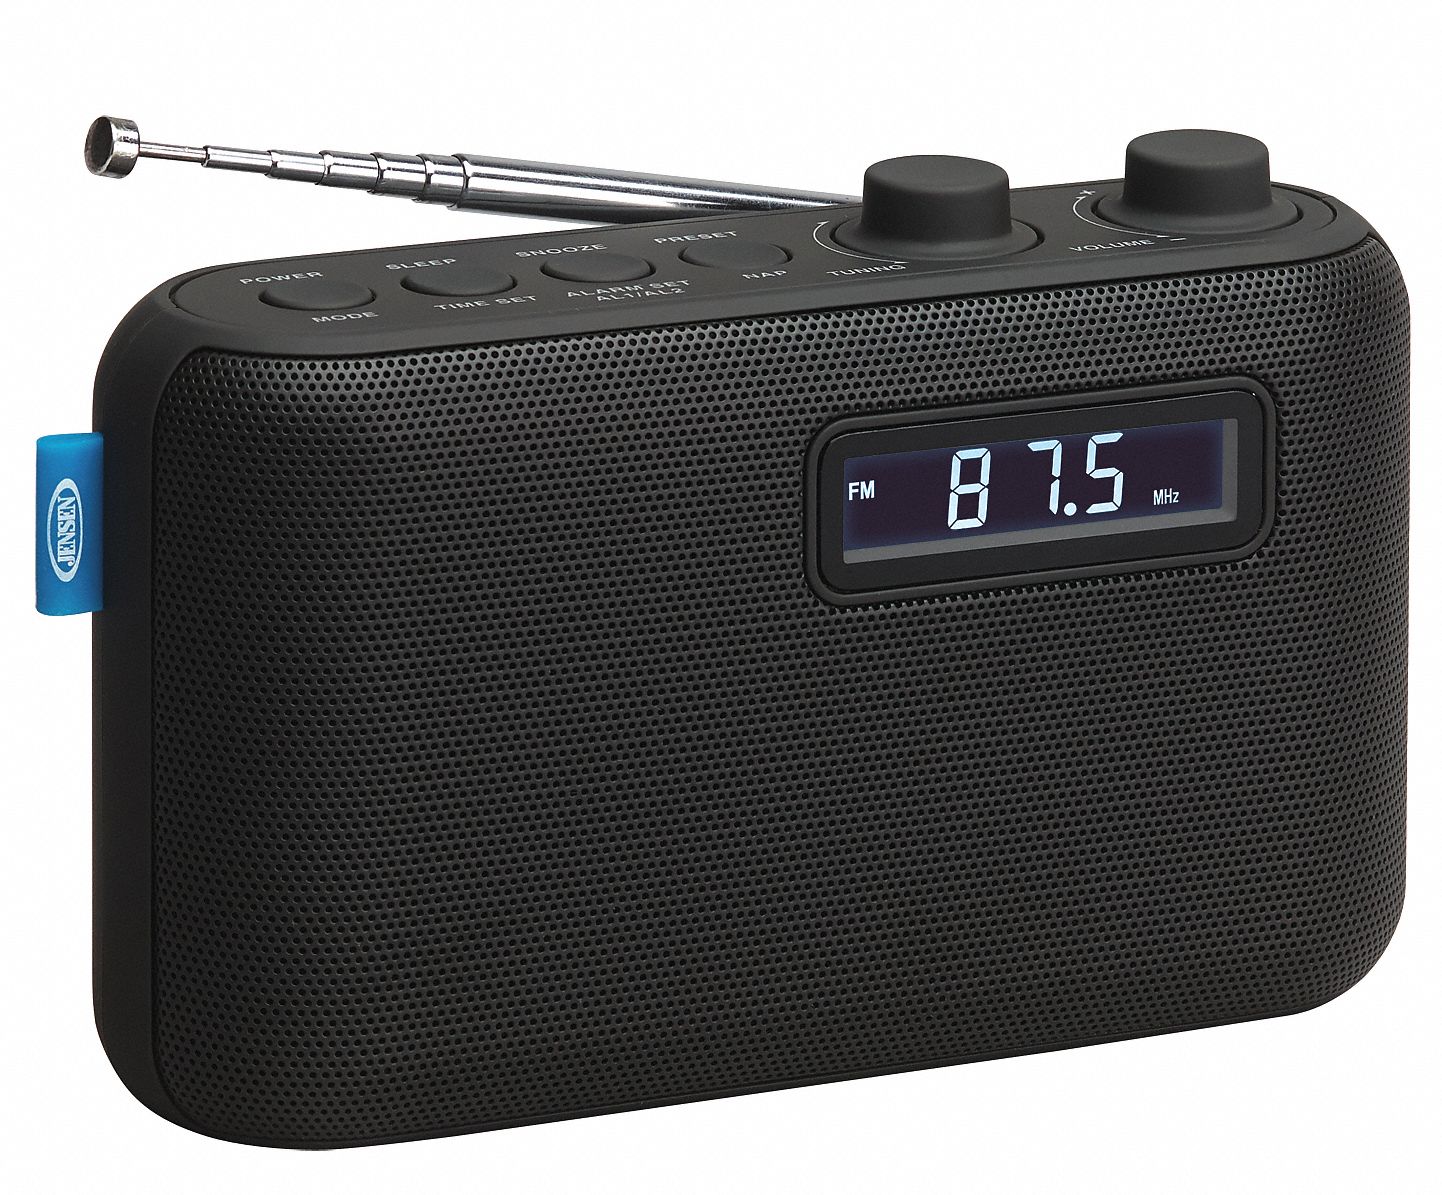 Radio: Batteries, 0 Alarms, Black, White, 6 in Radio Overall Wd, 6 in Radio Overall Dp